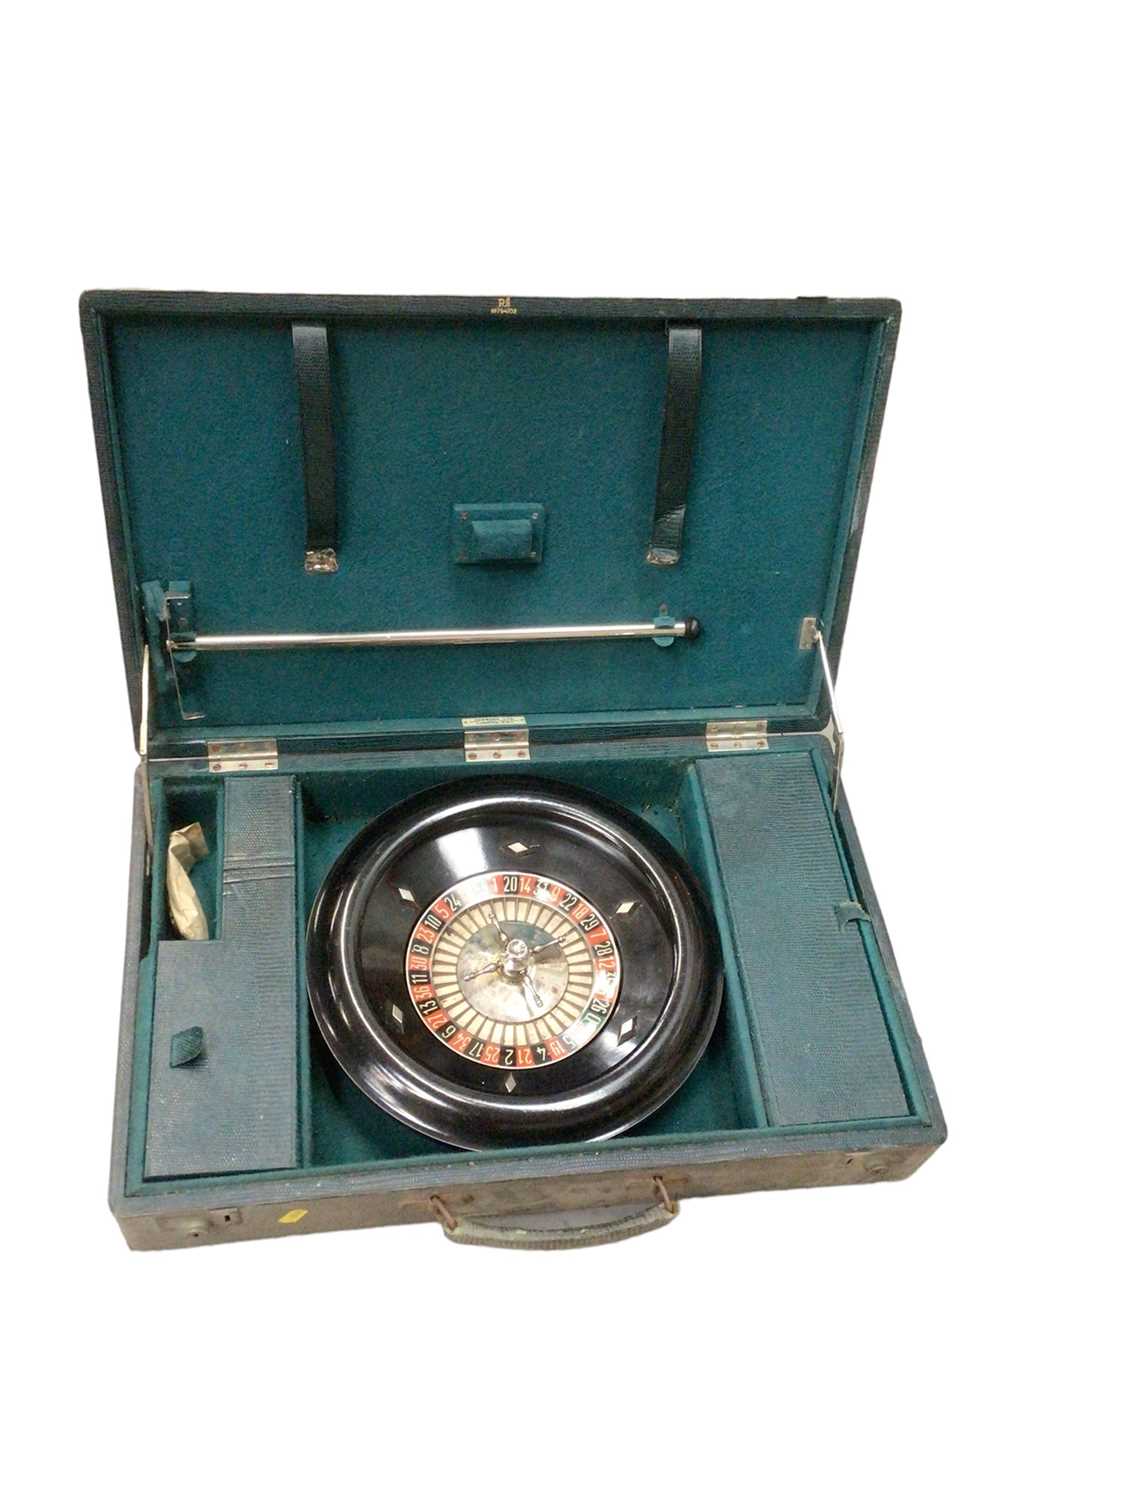 Vintage roulette wheel in leather case with counters and rake, retailed by Harrods